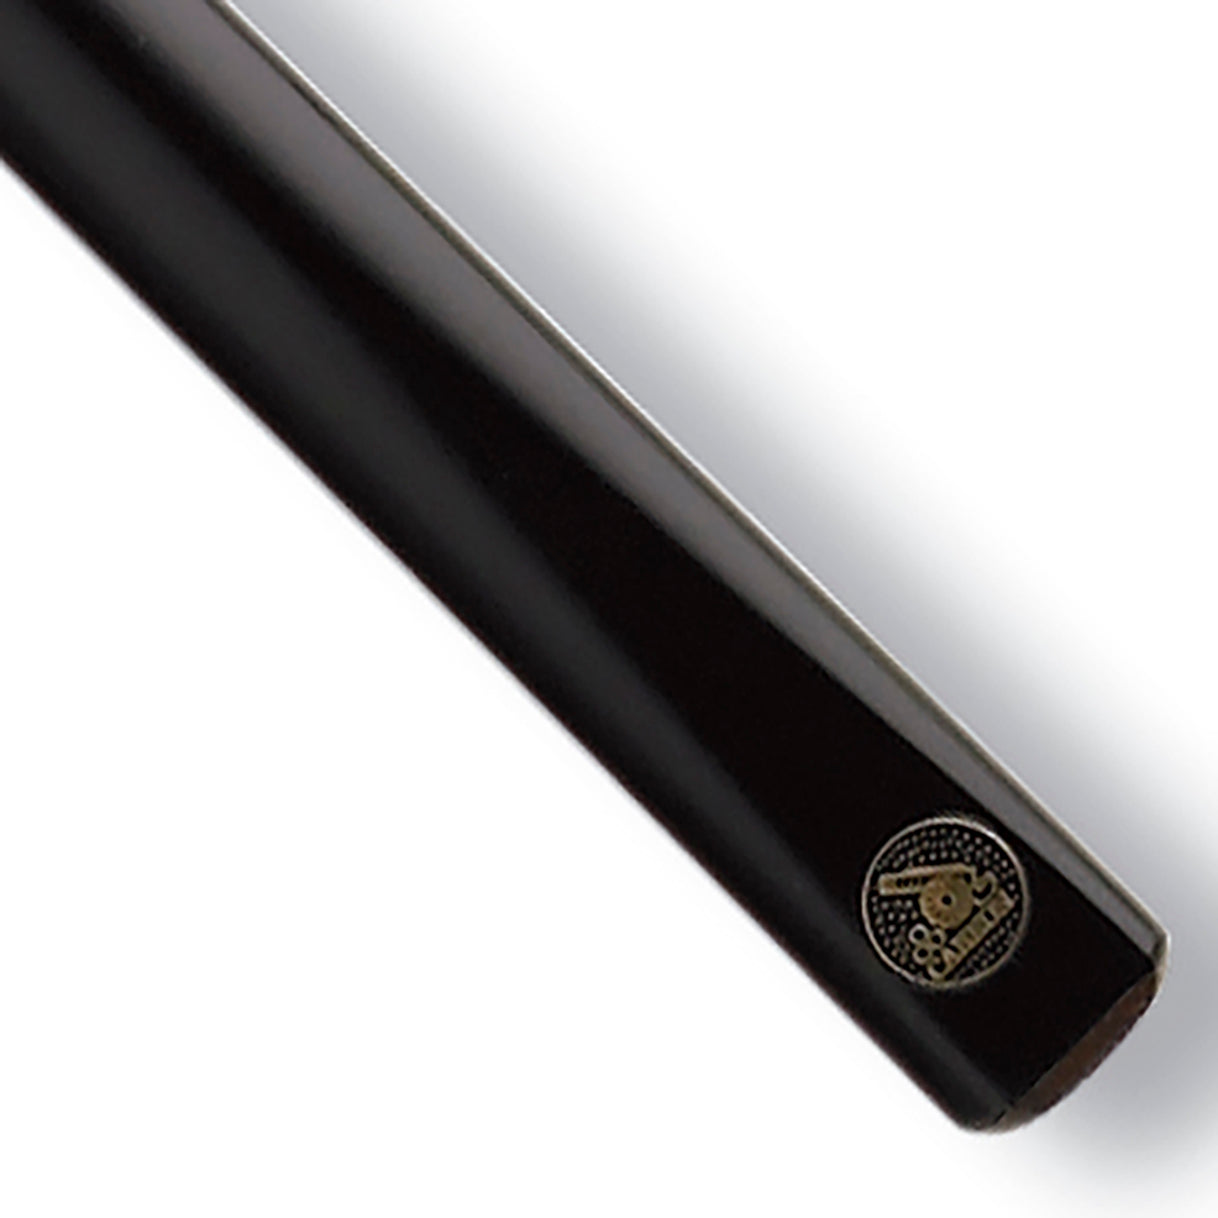 Cannon Tornado 3/4 Jointed Snooker Cue. Badge view